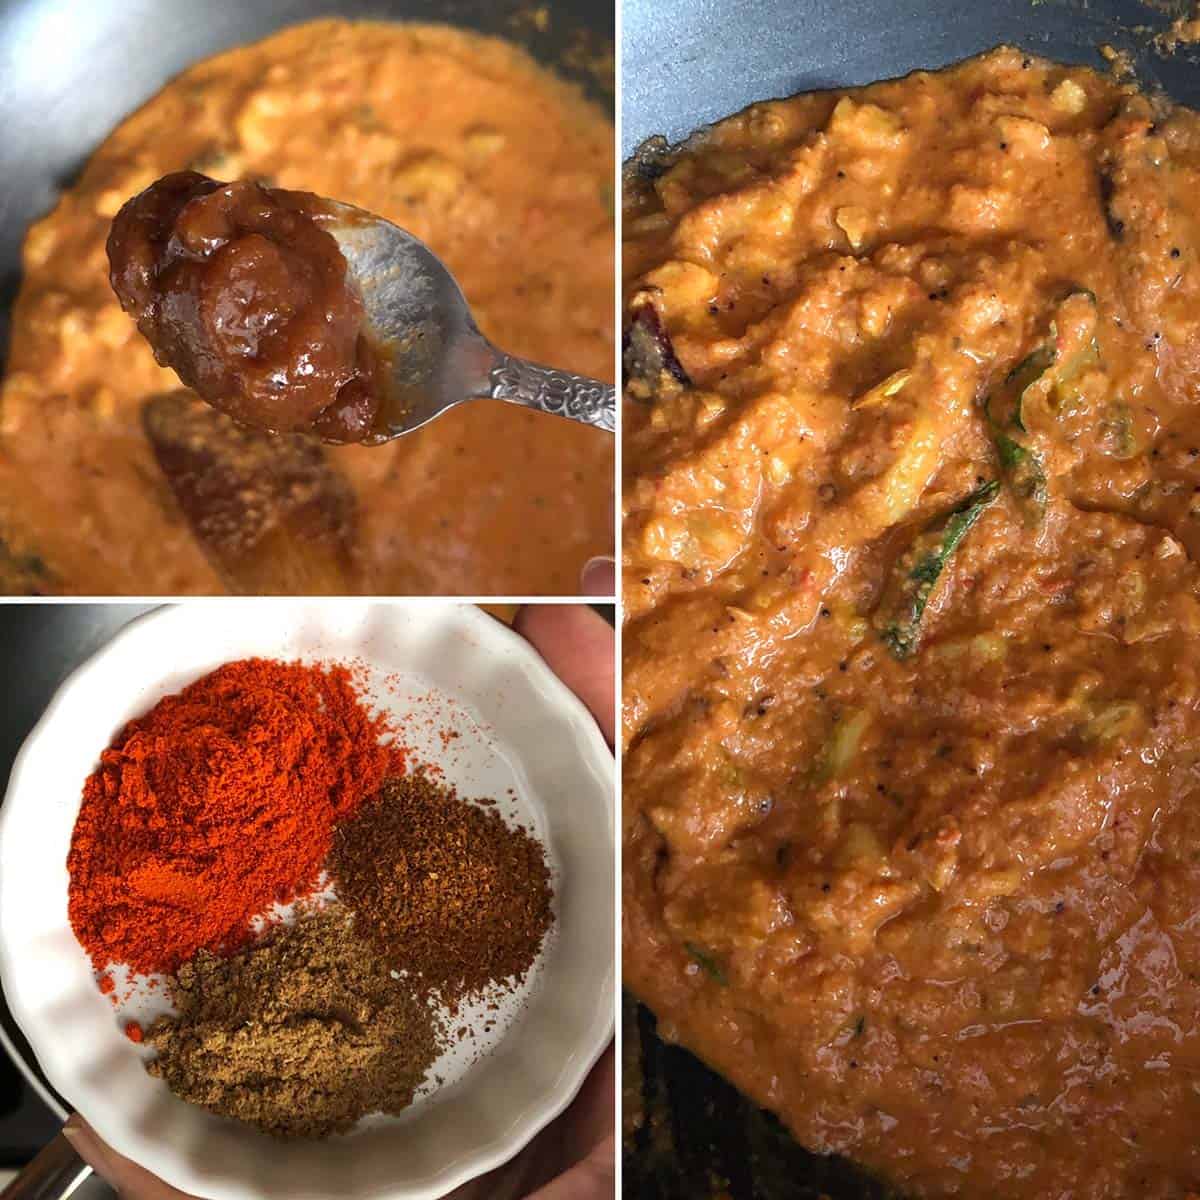 3 panel photo showing the addition of tamarind and spices to the curry.